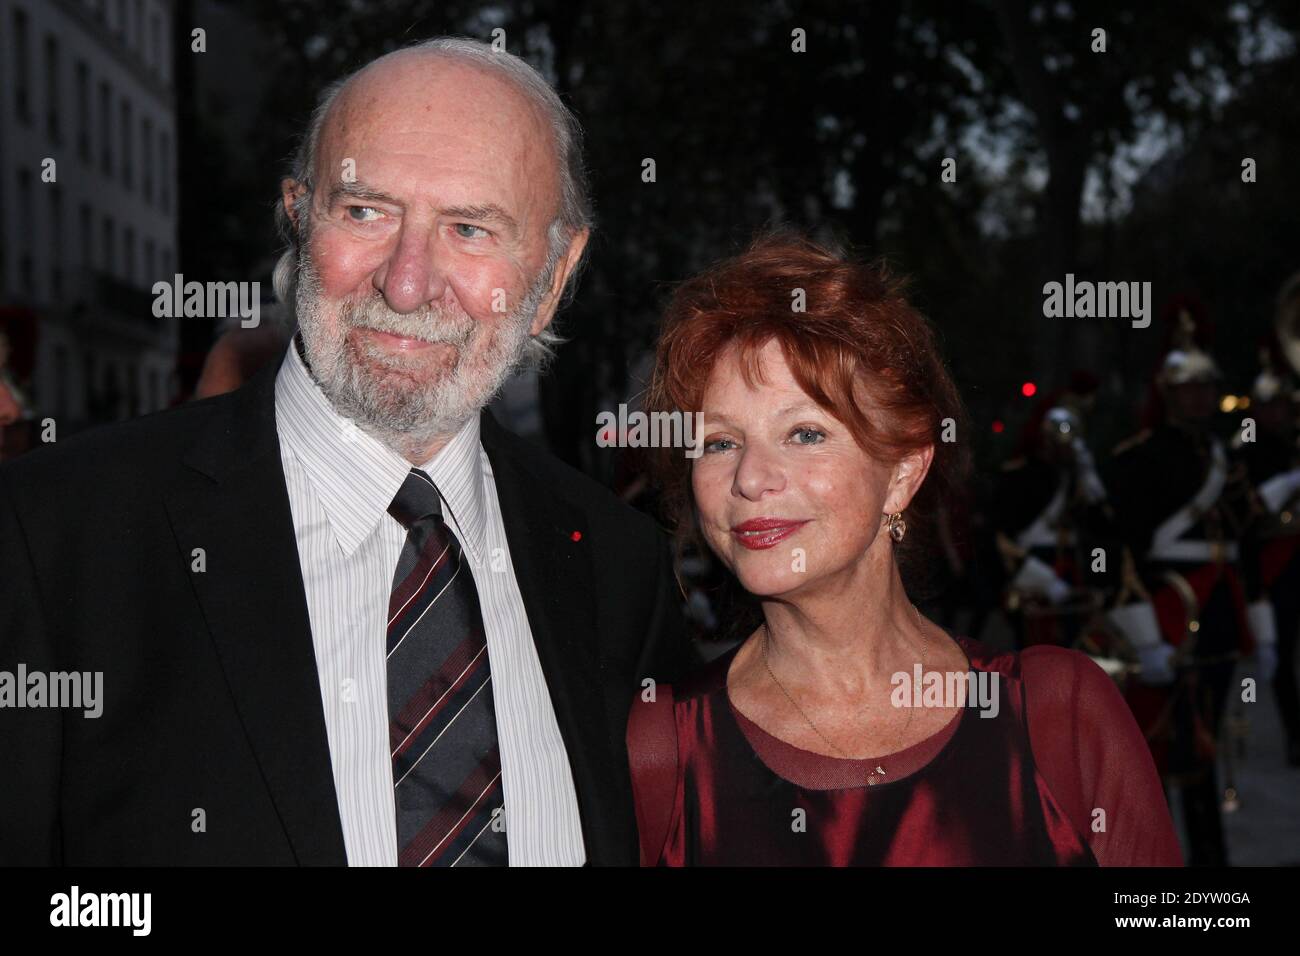 Jean-Pierre Marielle and his wife Agathe Natanson arriving at the IFRAD  charity Gala dinner held